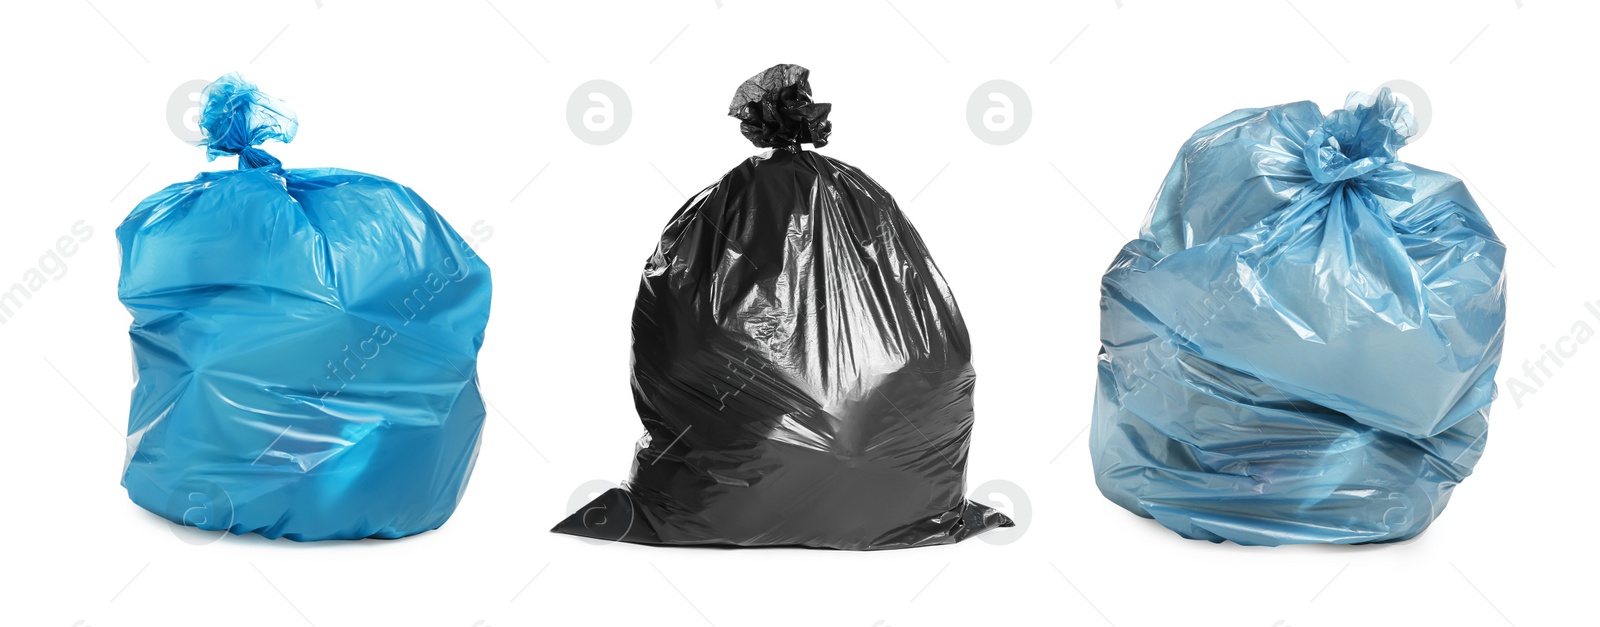 Image of Set with trash bags filled with garbage on white background. Banner design